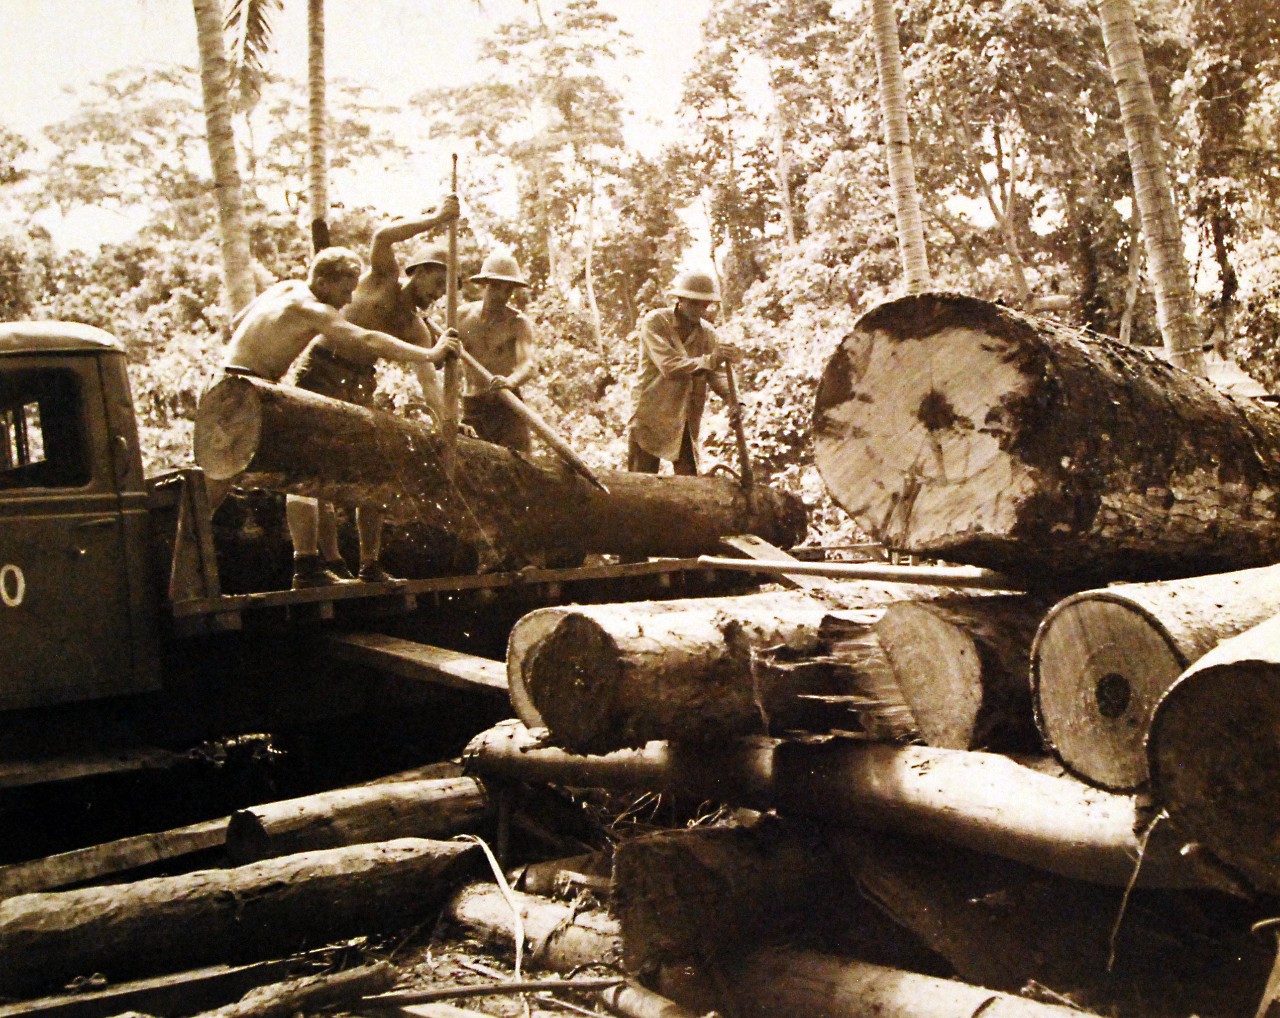 80-G-39221: Guadalcanal Campaign, August 1942-February 1943.  Navy Seabees doing construction work at Guadalcanal.  Note work in the sawmill, lifting logs from a truck, January 30, 1943.   Official U.S. Navy photograph, now in the collections of the National Archives.  (2016/12/06).